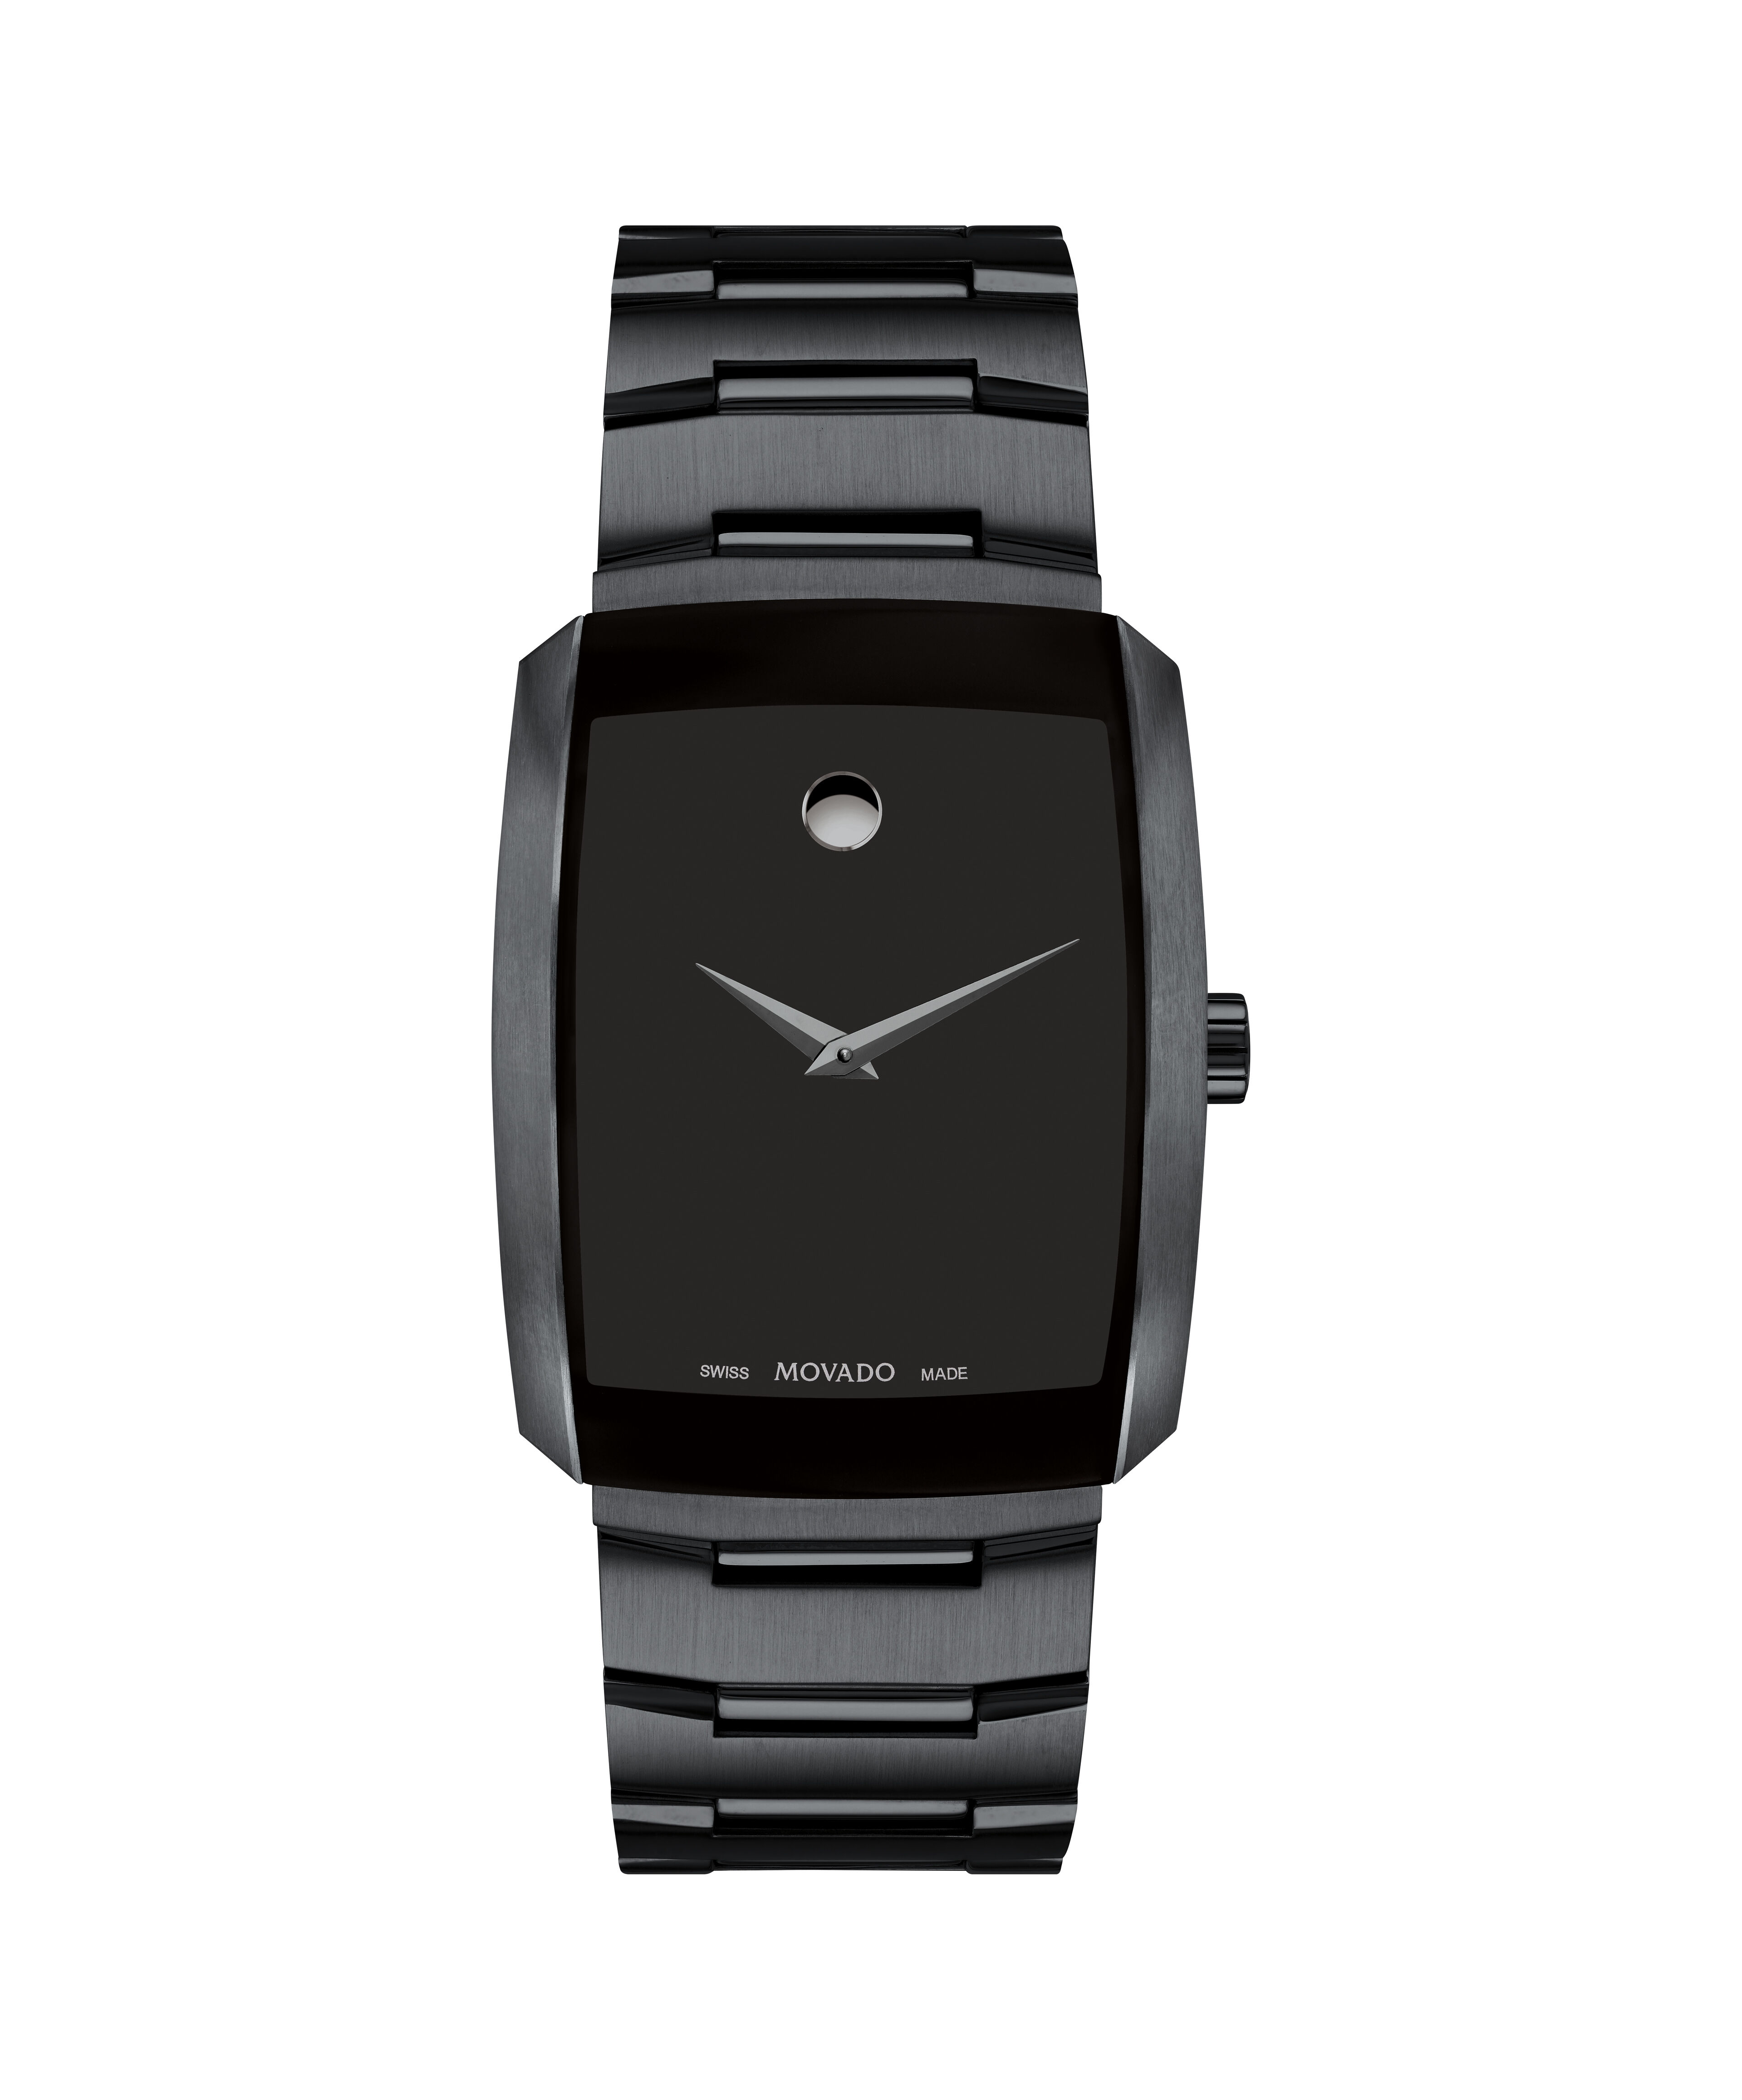 How To Check If Movado Watch Is Replica